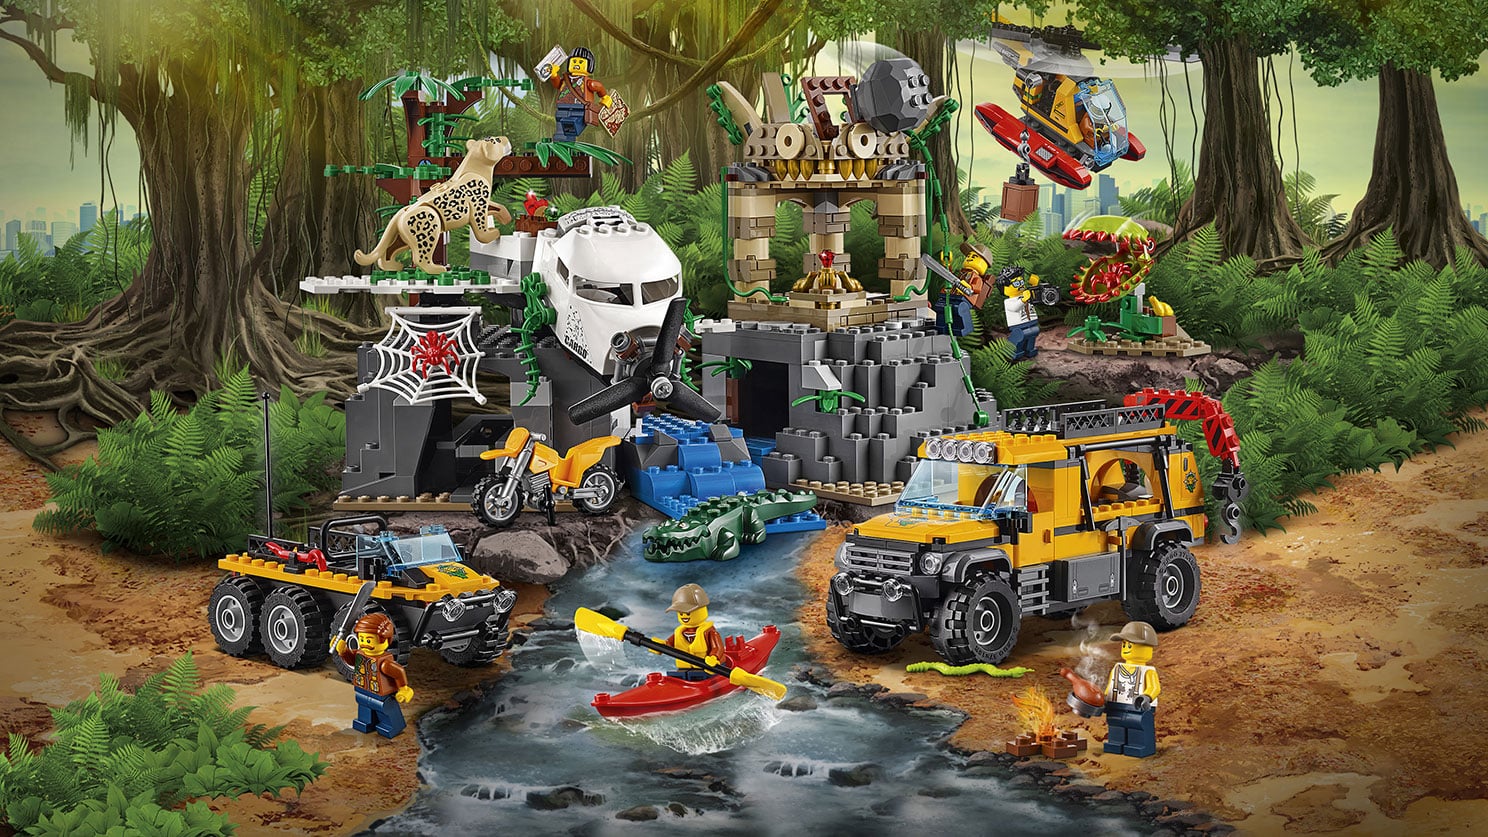 LEGO City Jungle Explorers Jungle Exploration Site | Get Building! These Are the New Lego Sets of 2017 | POPSUGAR Family Photo 37